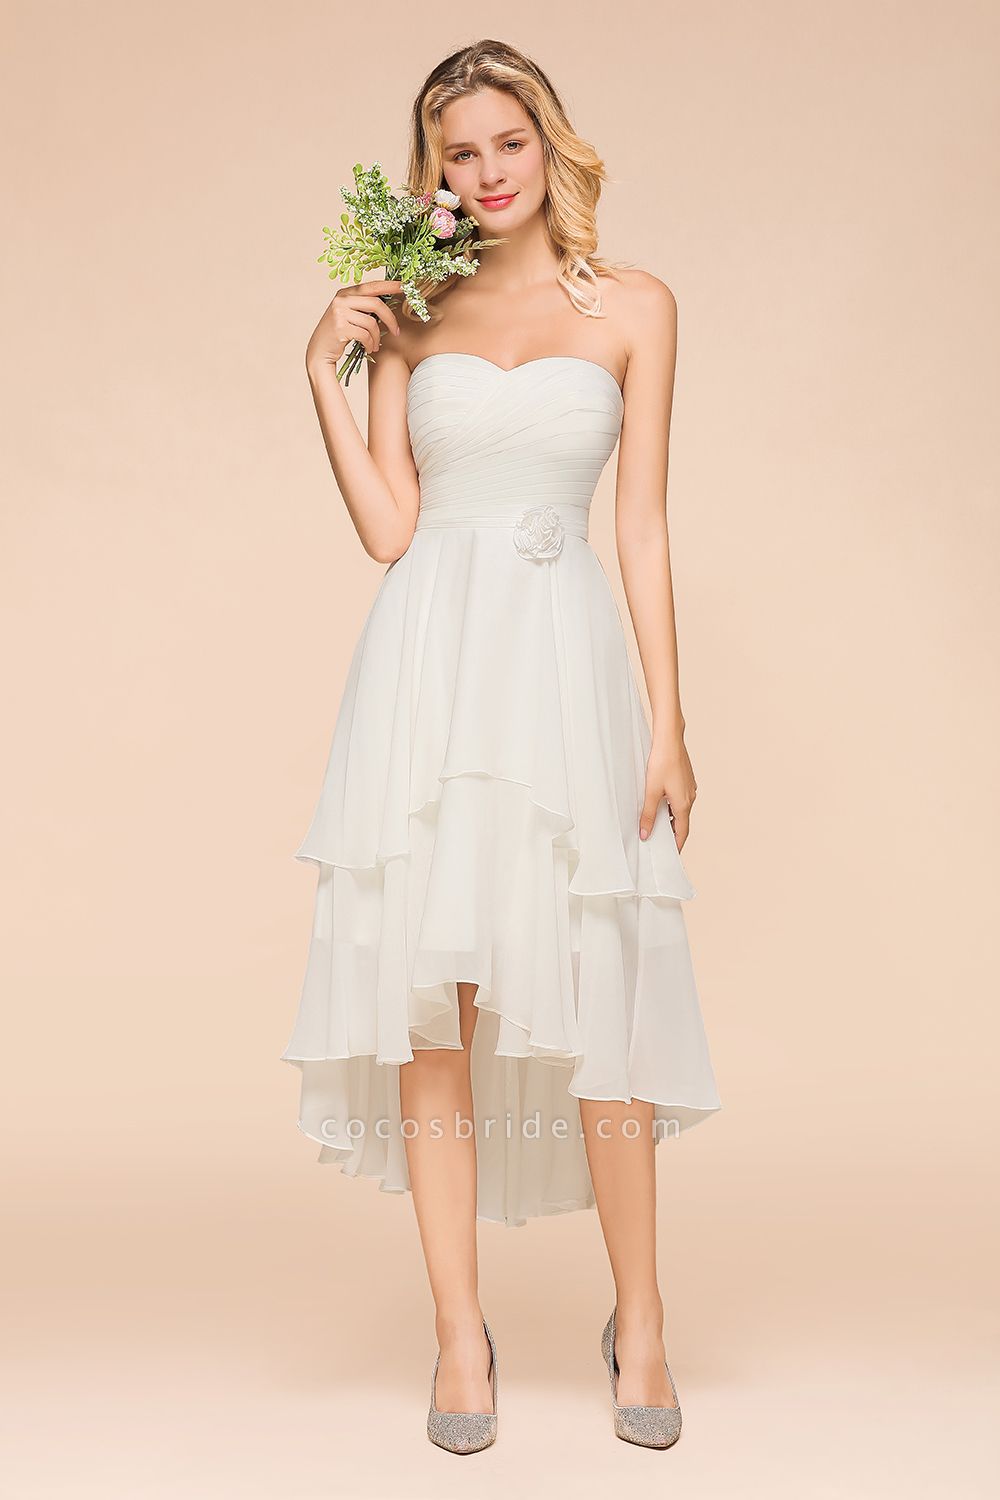 Vintage White Strapless A-line High Low Chiffon Backless Bridesmaid Dresses